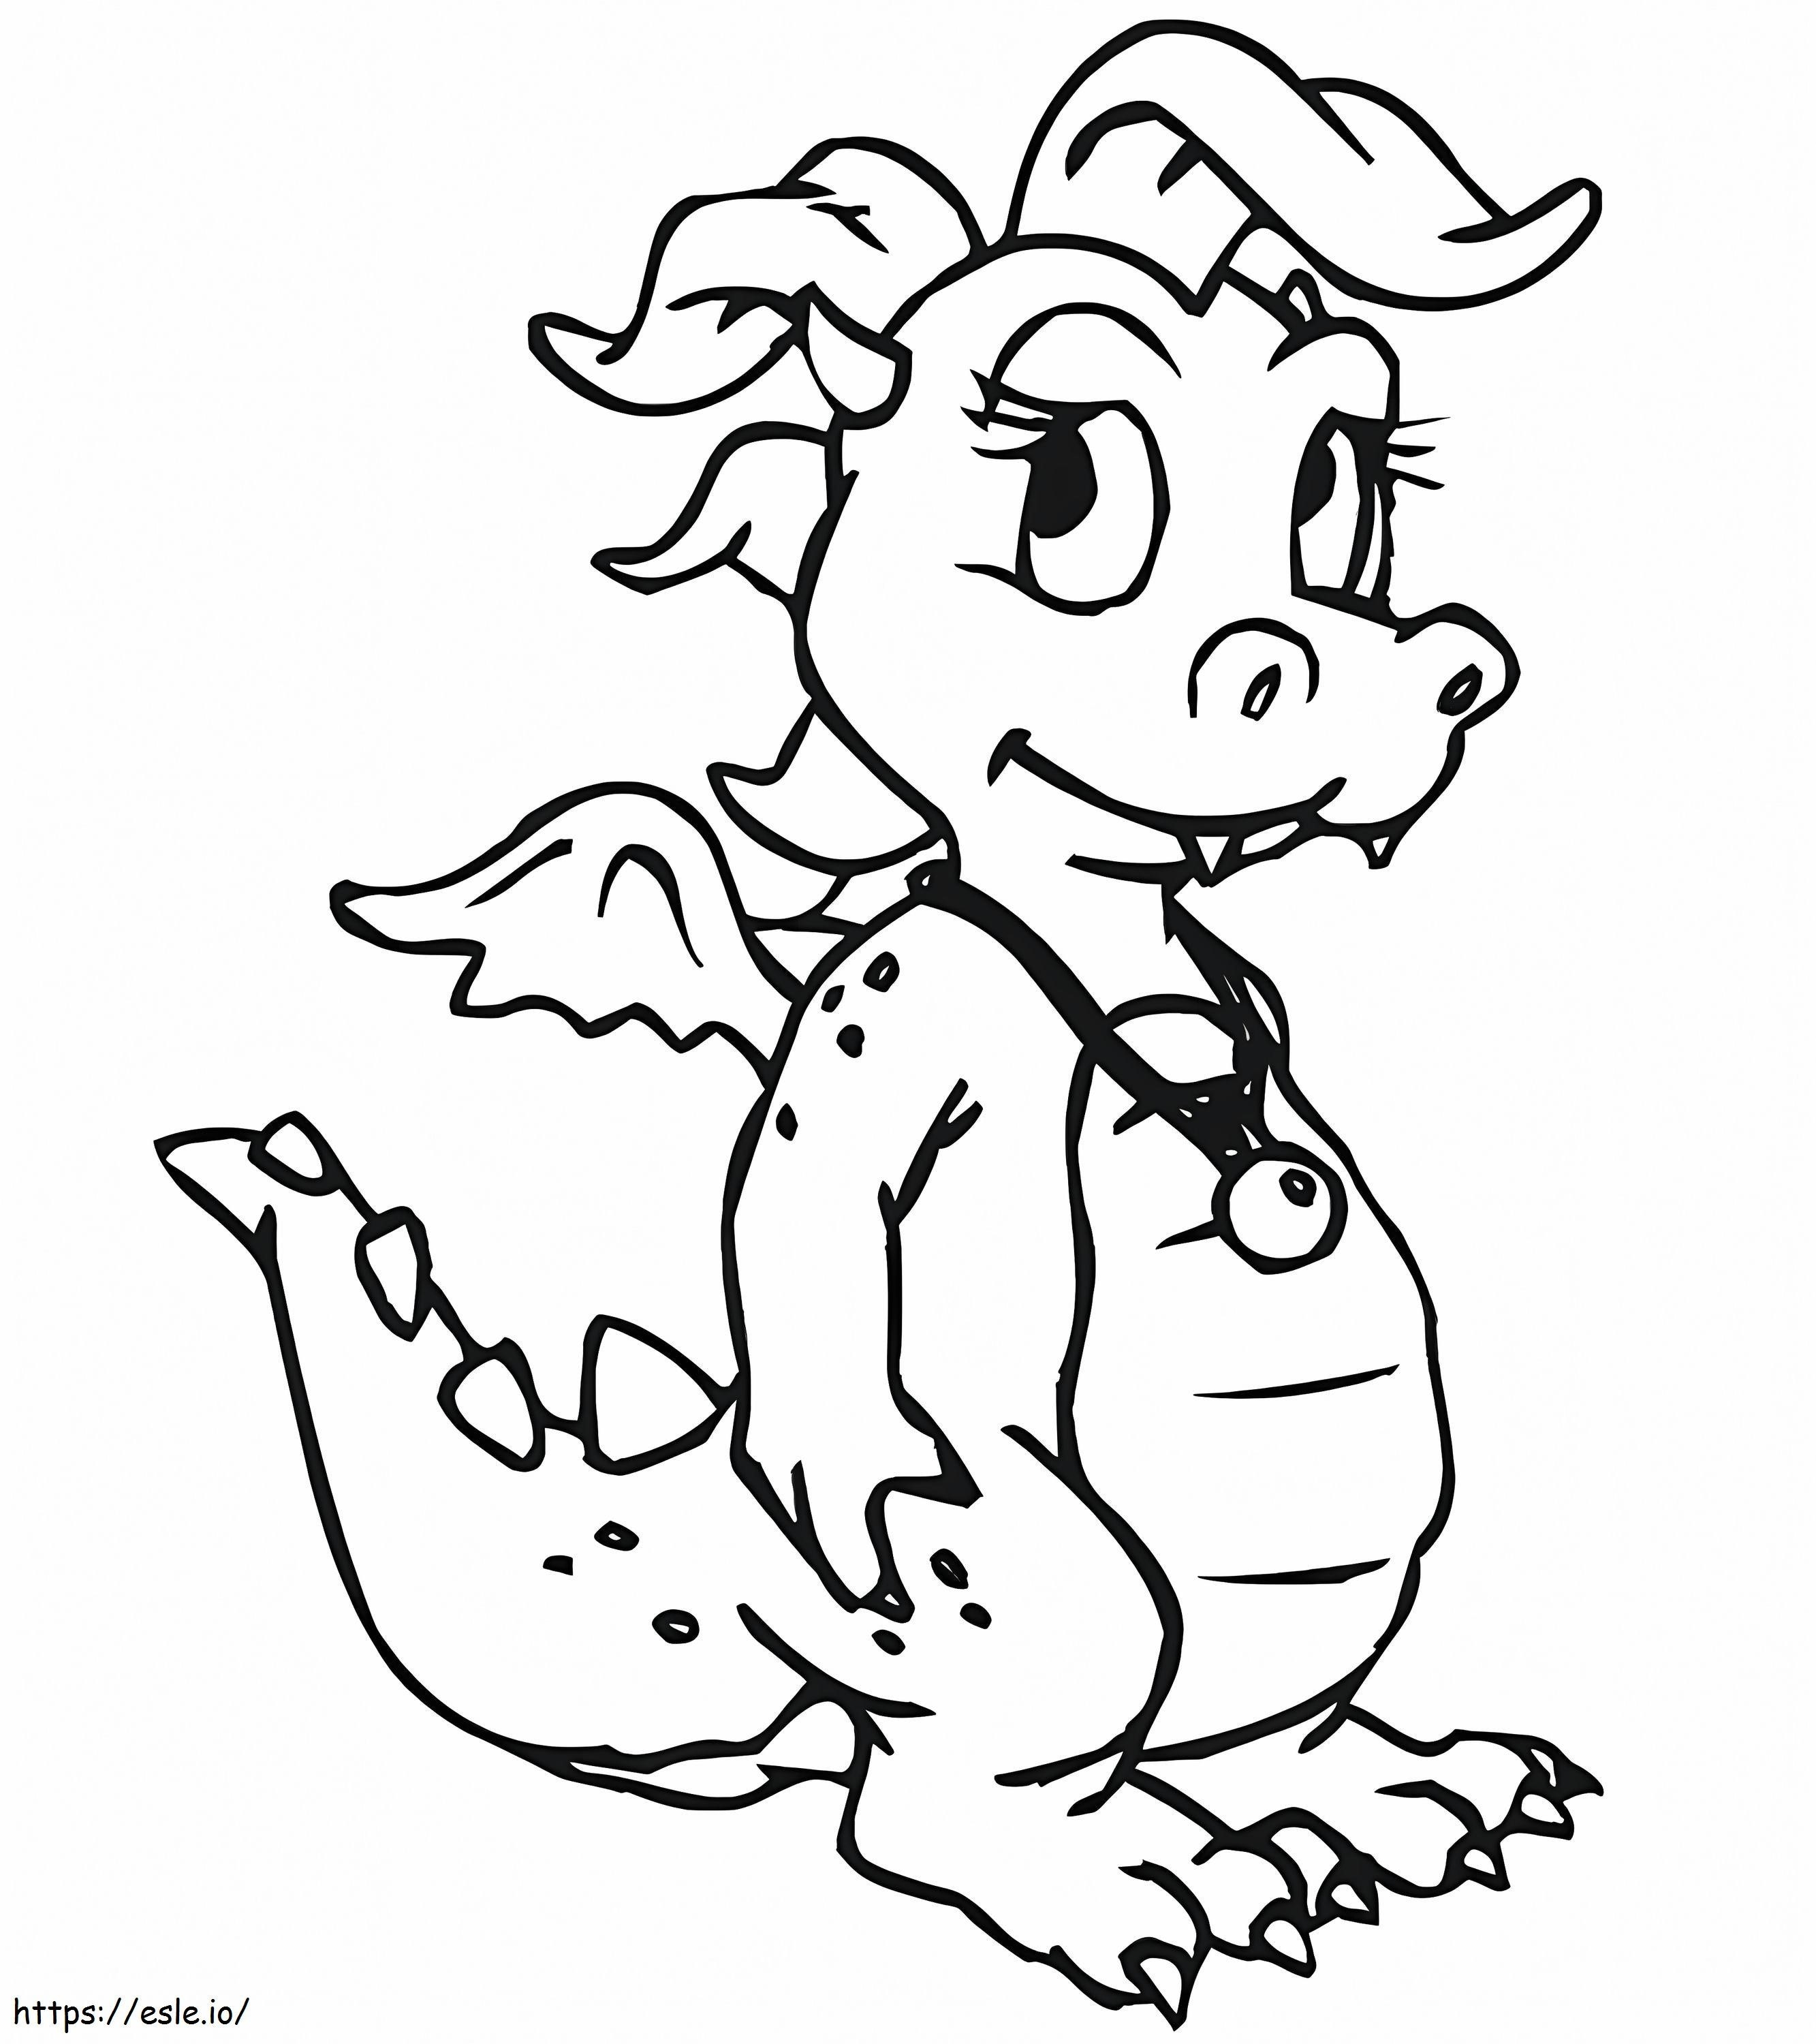 Standing Dragon coloring page